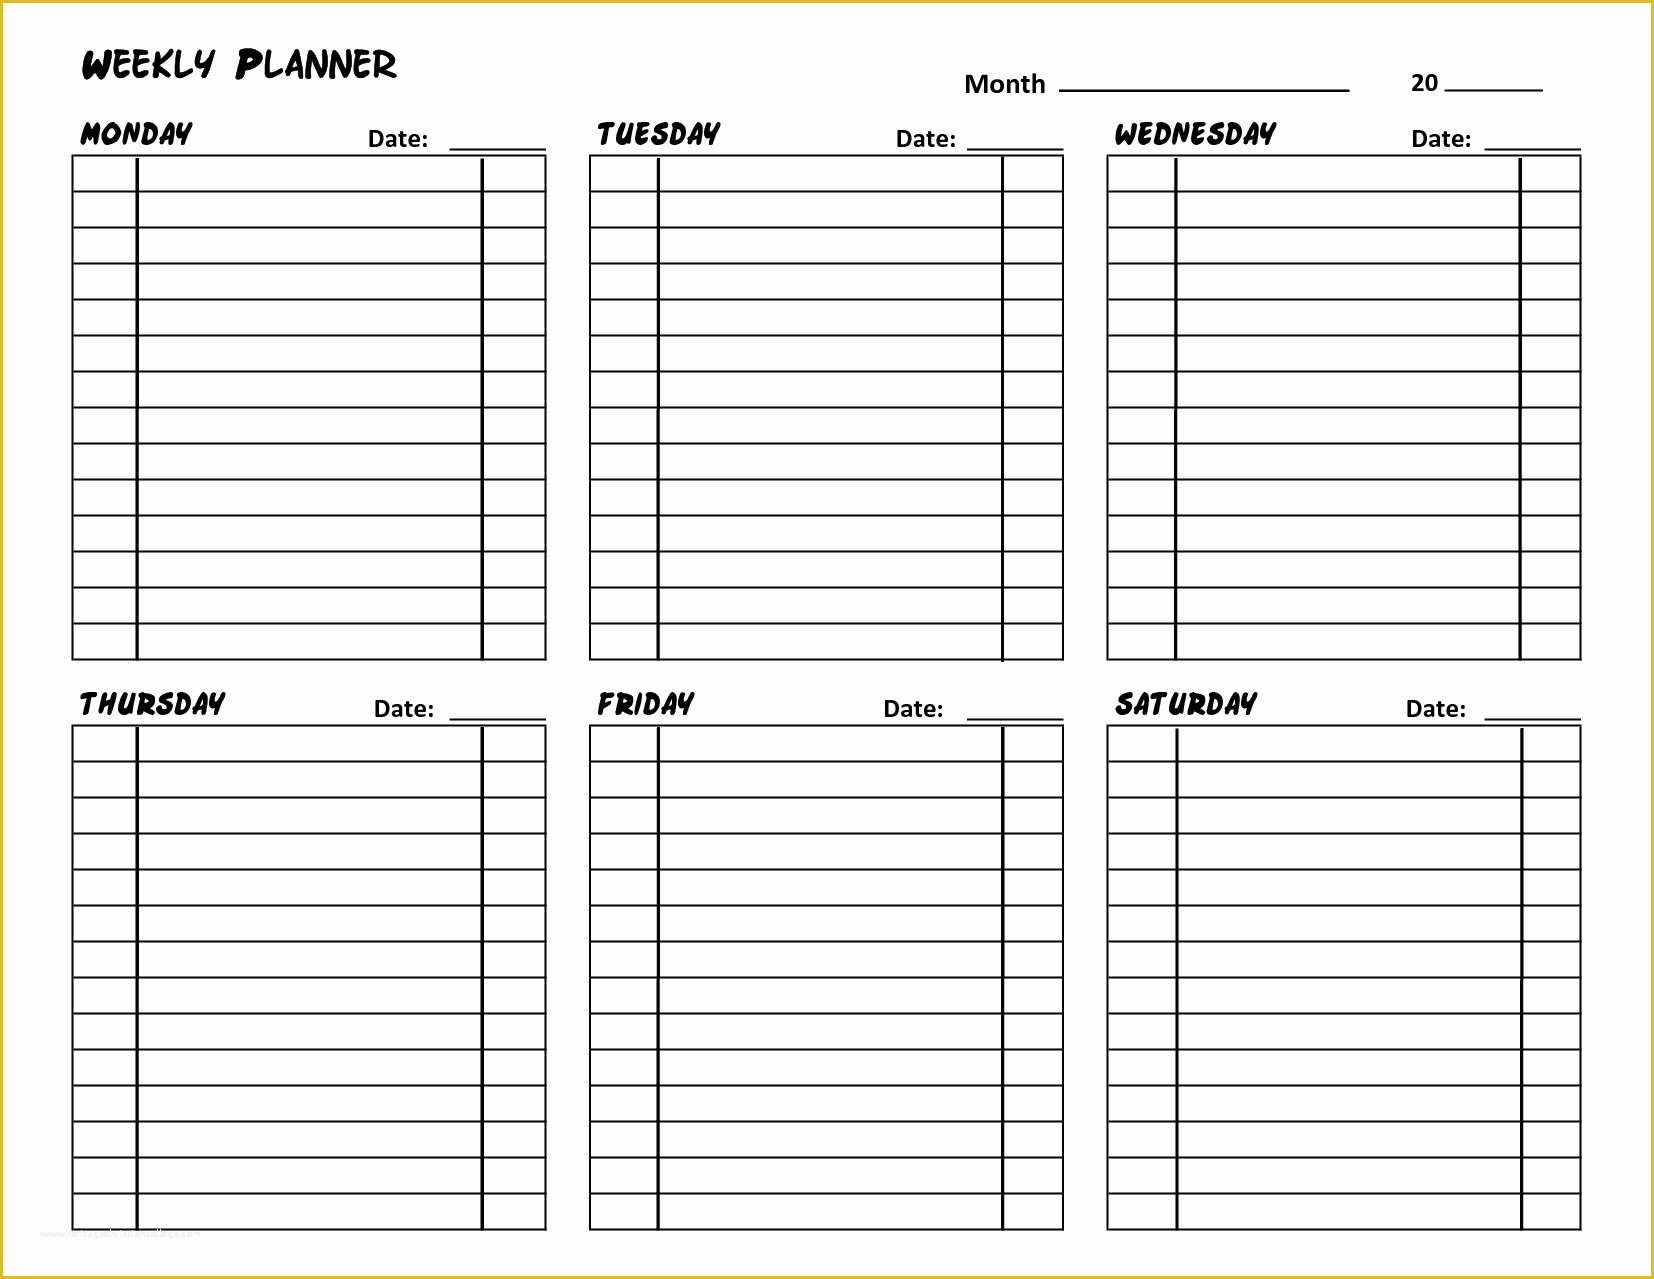 Free Weekly Planner Template Word Of 5 Daily Planner Template Word